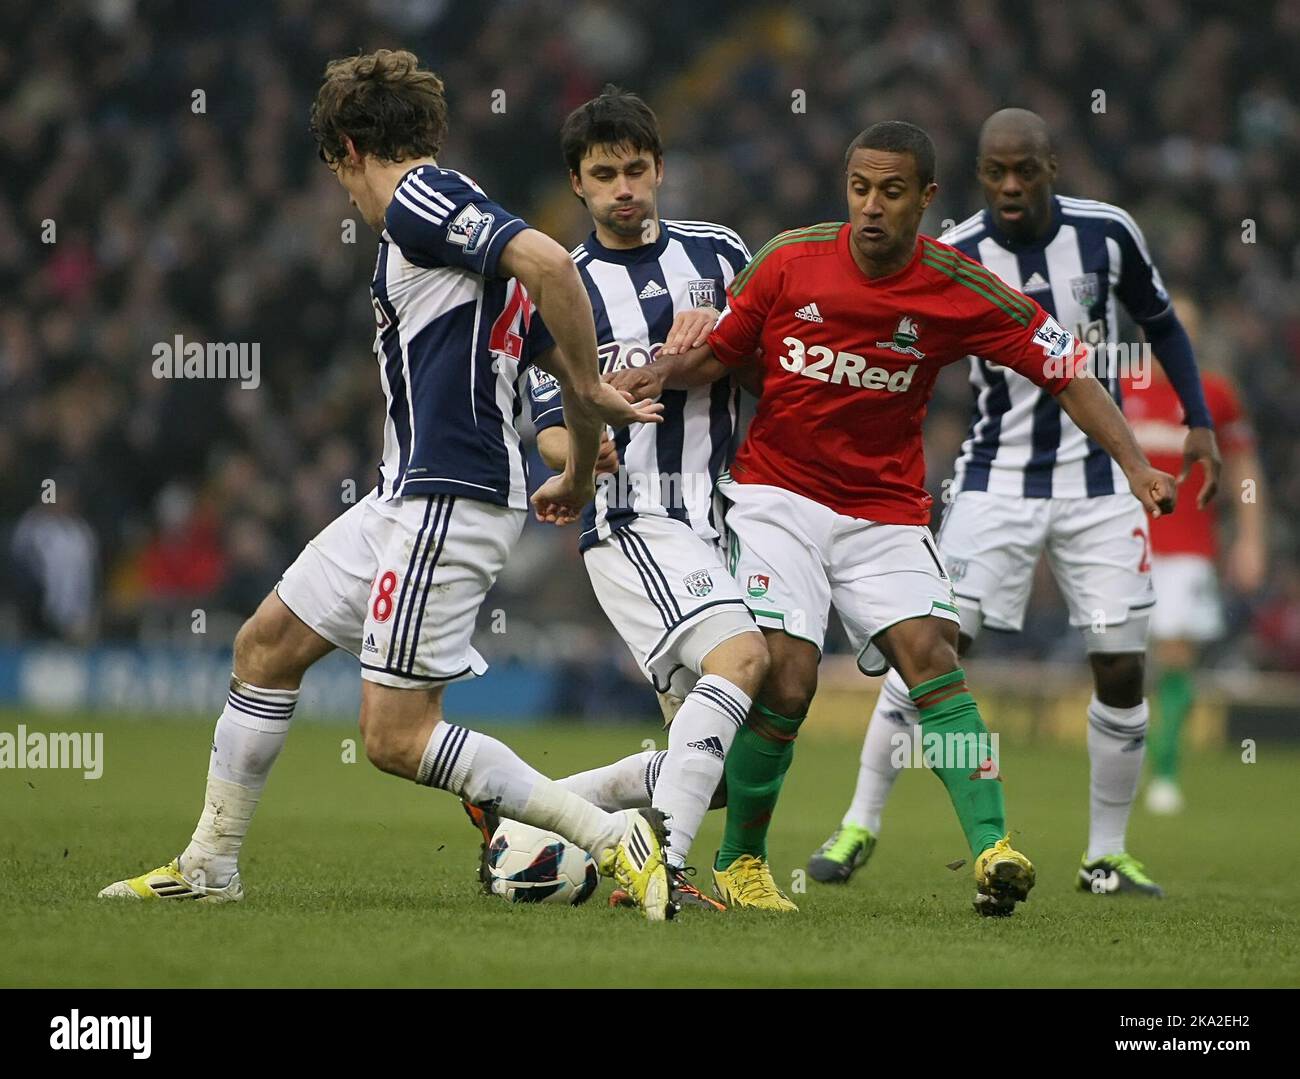 09 March 2013  - Soccer - Barclays Premiership Football - West Bromwich Albion Vs. Swansea City -  Wayne Routledge of Swansea City is stopped by a combination of West Bromwich Albion defenders - Photo: Paul Roberts/Pathos. Stock Photo